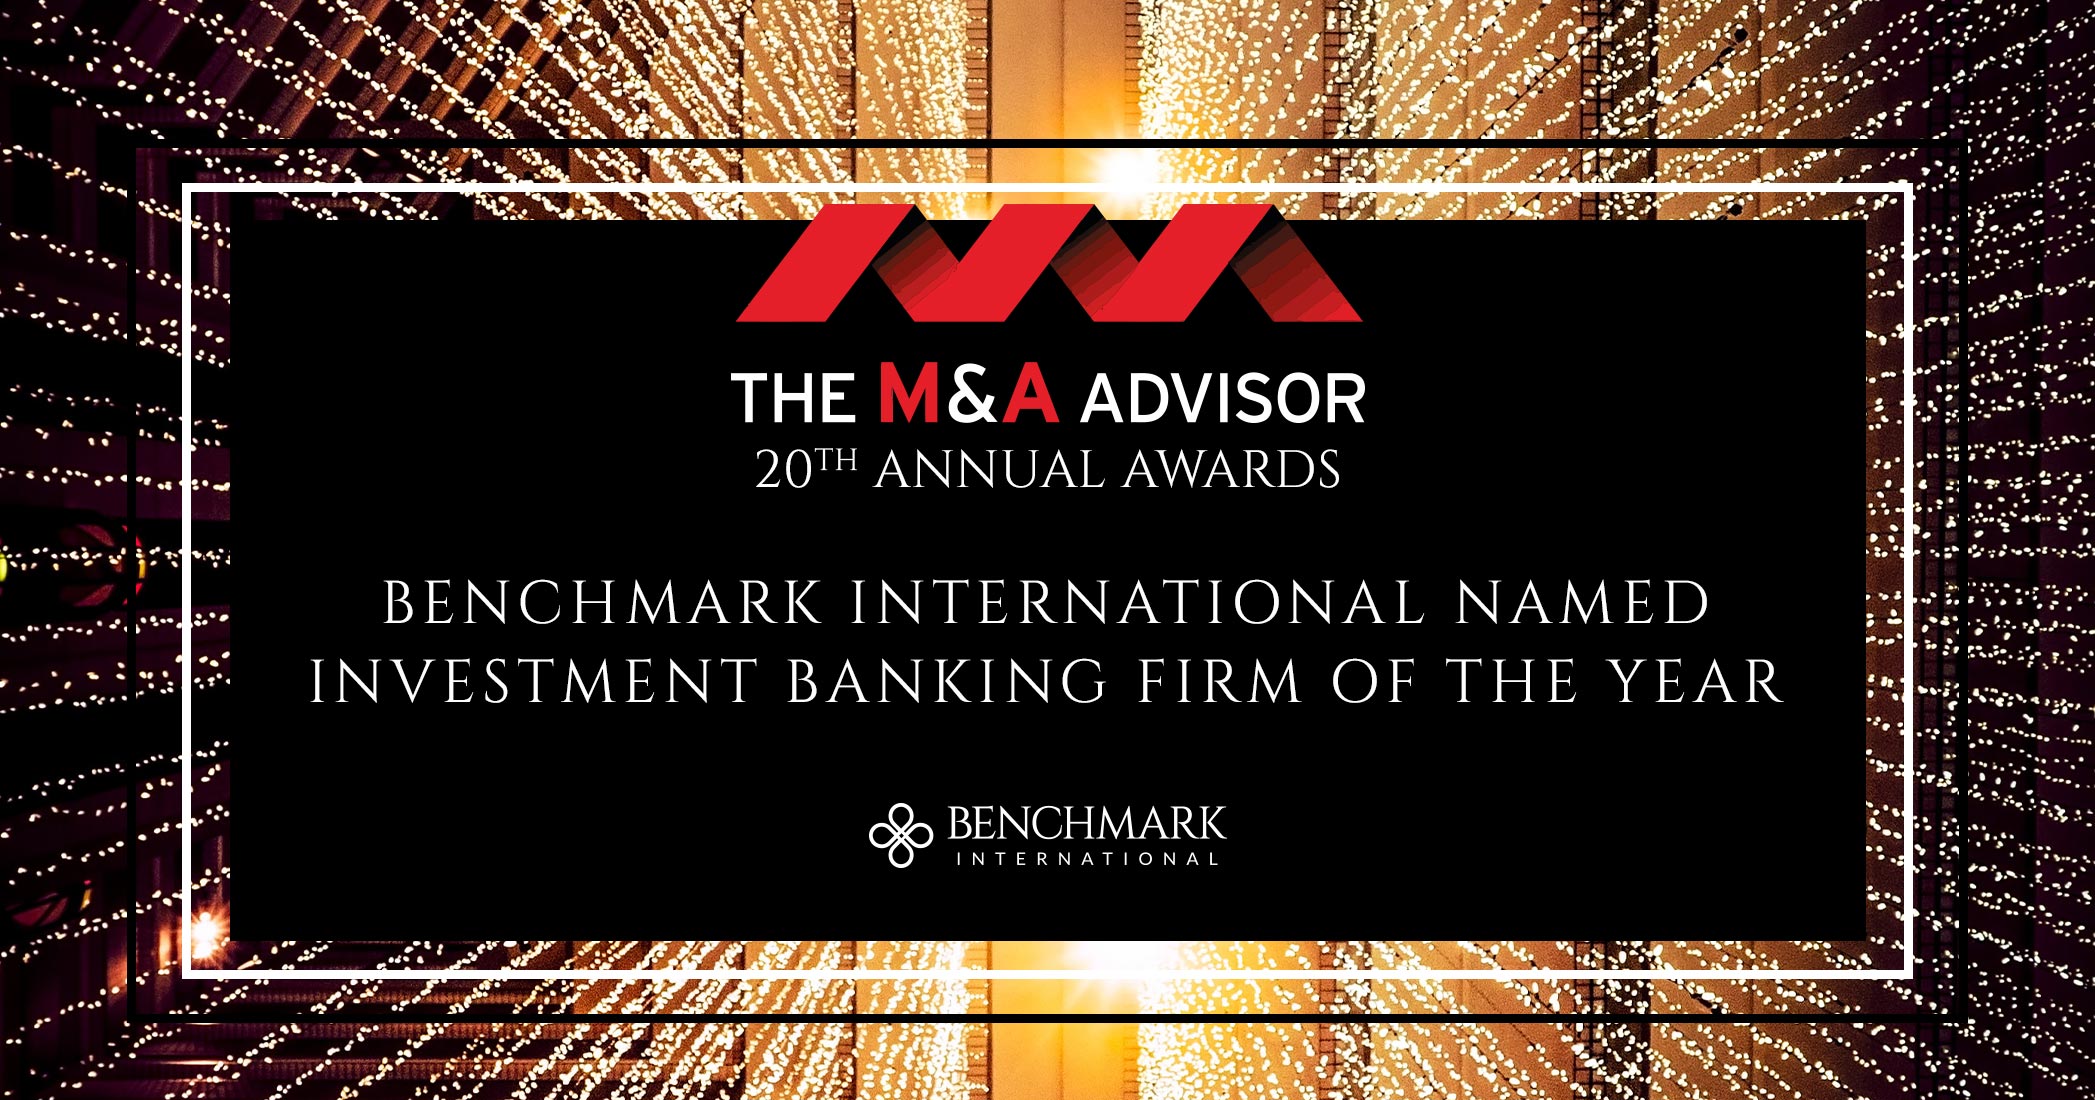 Benchmark International Named Investment Banking Firm of The Year